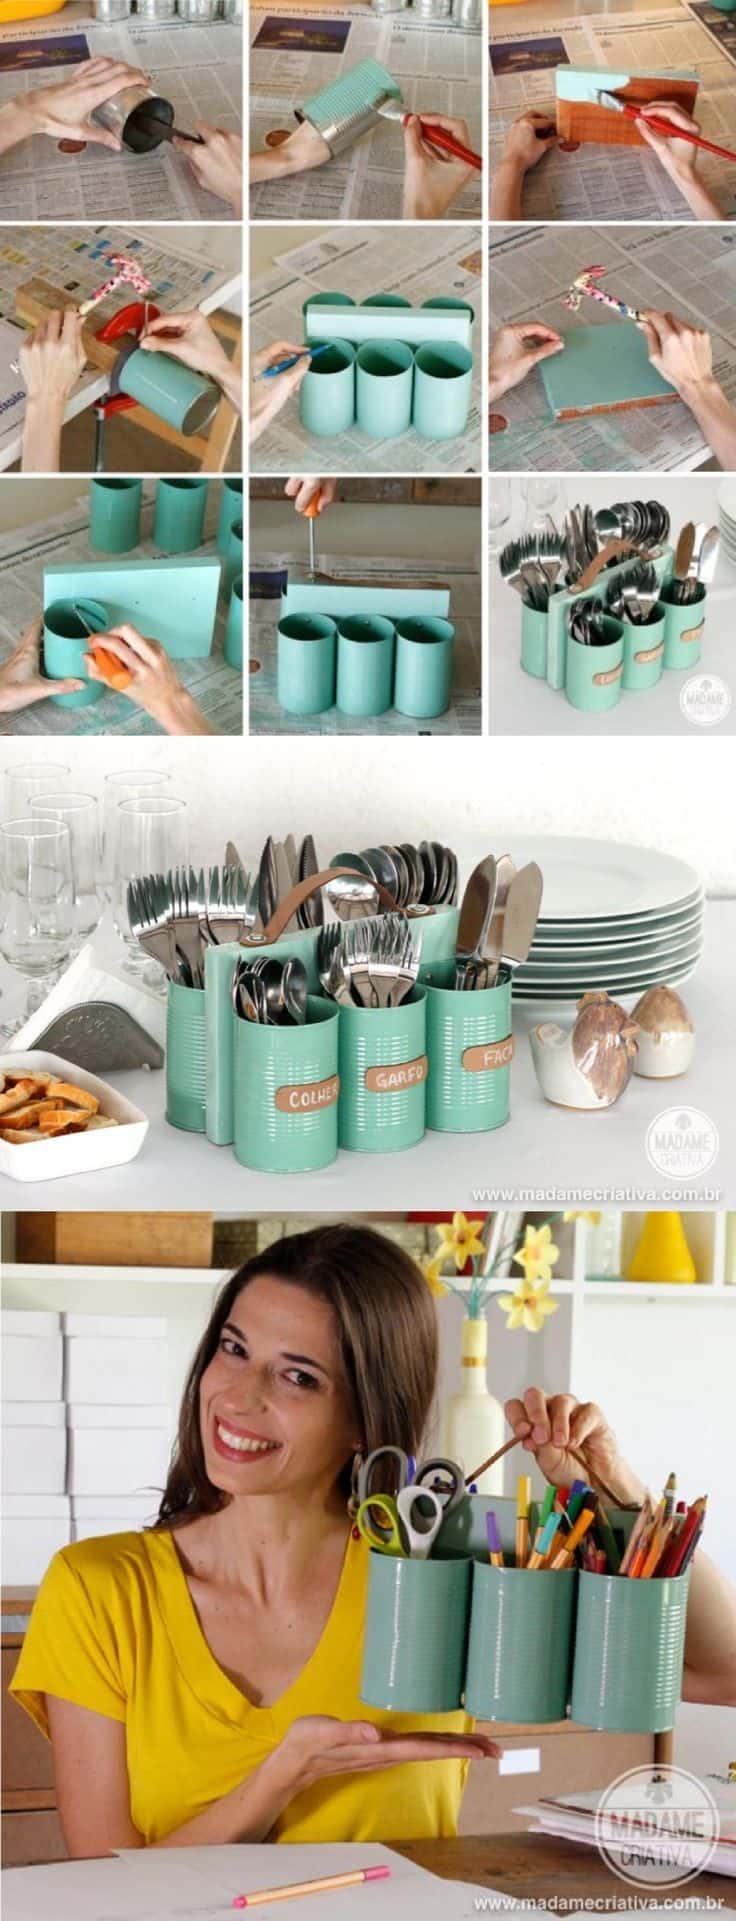 17 Innovative Ways To Recycle And Decorate Discarded Tin Cans For Everyday Use (3)